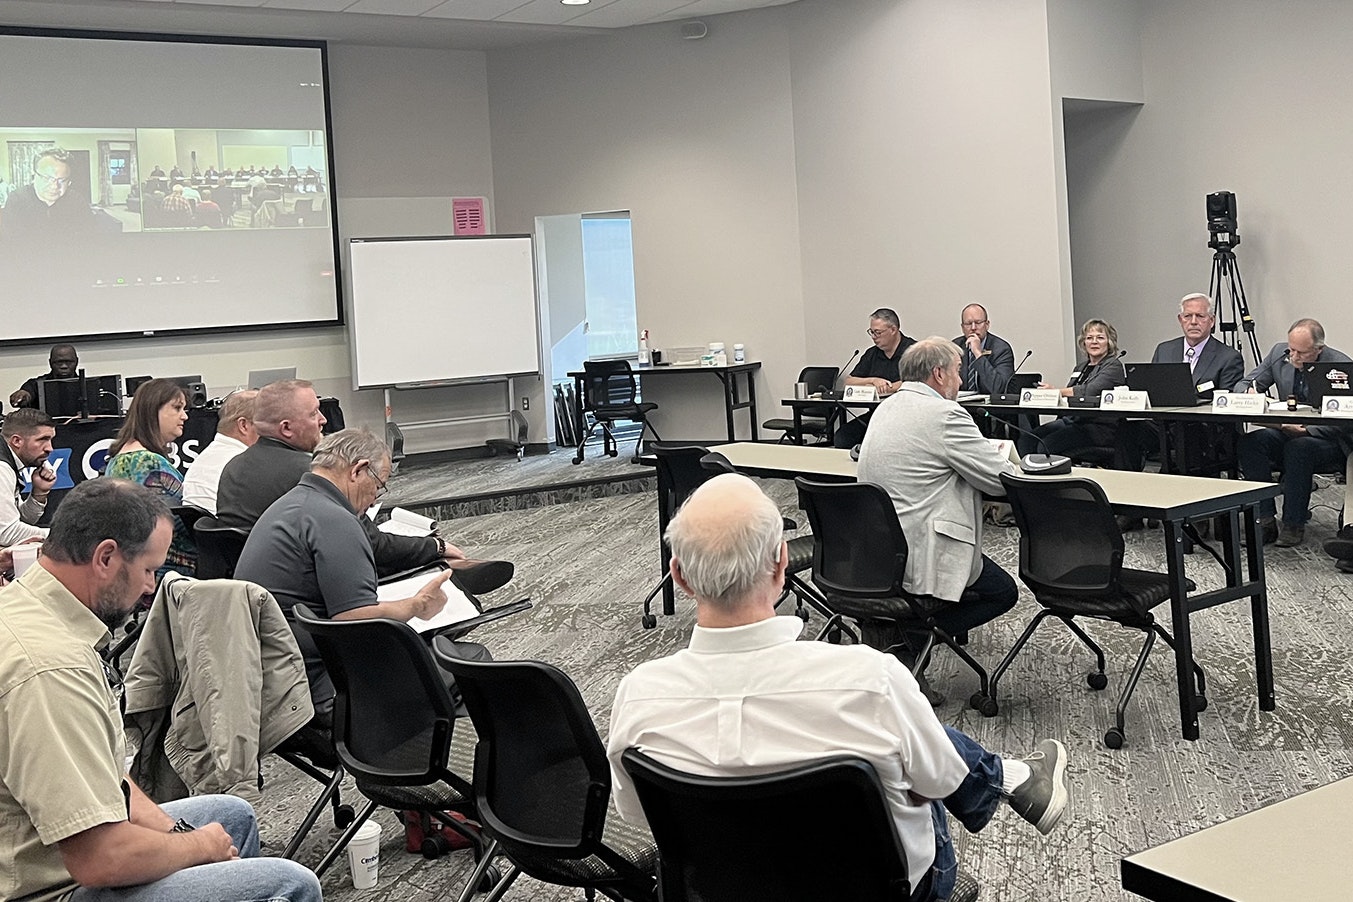 Members of the Wyoming Shooting Complex Task Force met in Riverton on Wednesday to discuss the proposed complex and hear public comments.